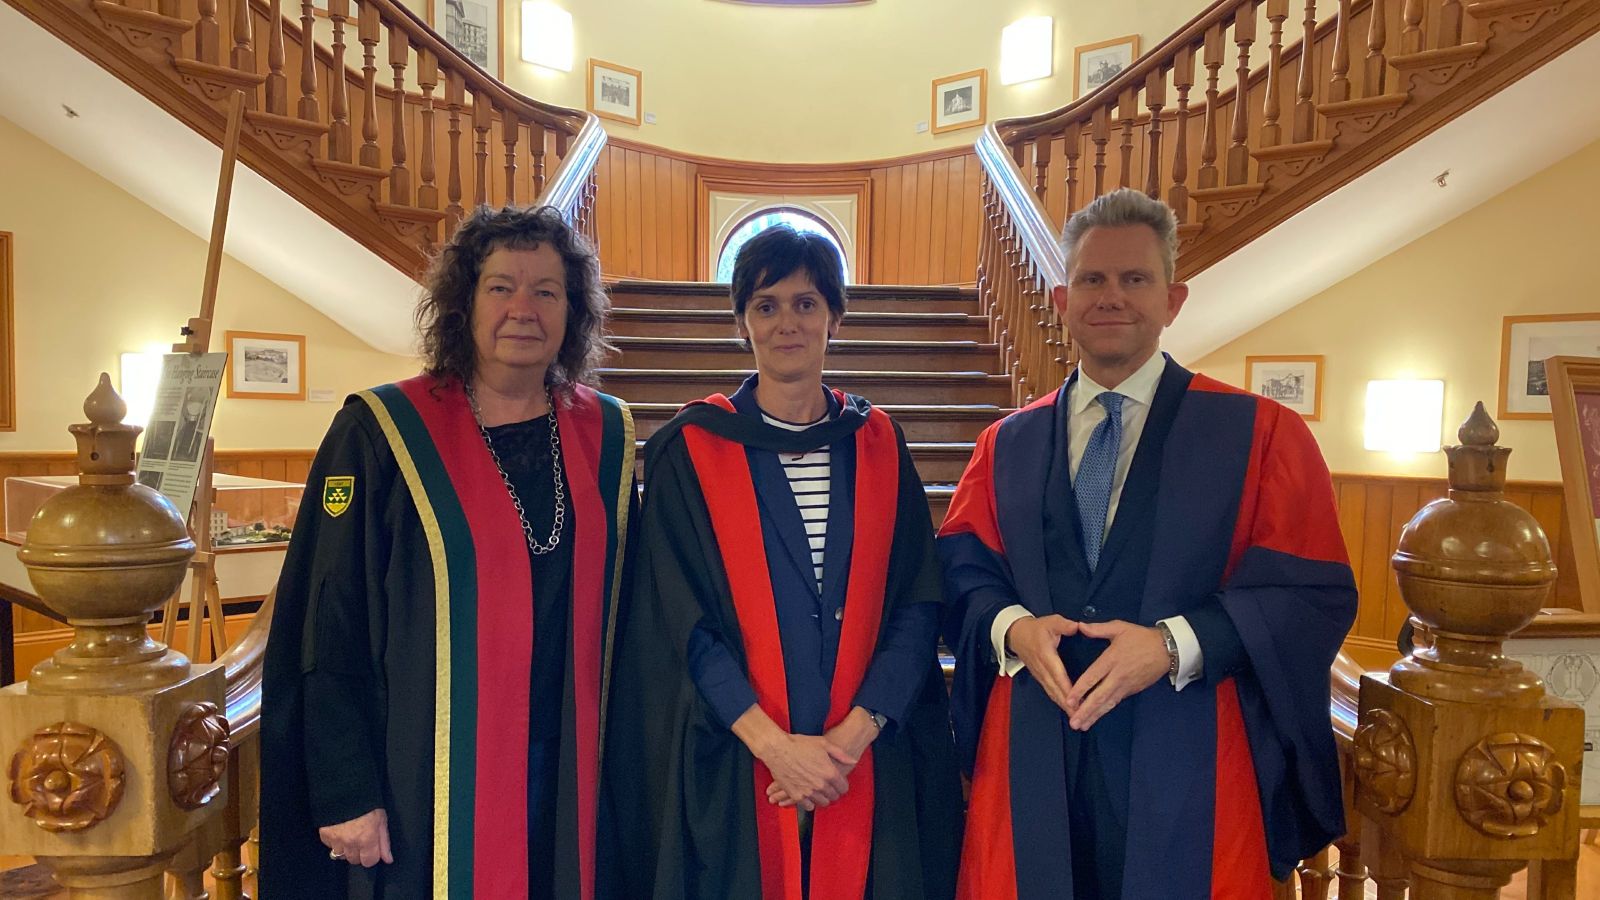 Three academics in formal robes - from left to right Provost Professor Wendy Larmer, Professor of Law Nicole Moreham and Pro Vice-Chancellor Professor Mark Hickford - standing at the foot of an impressive wooden staircase in the Old Government Building.